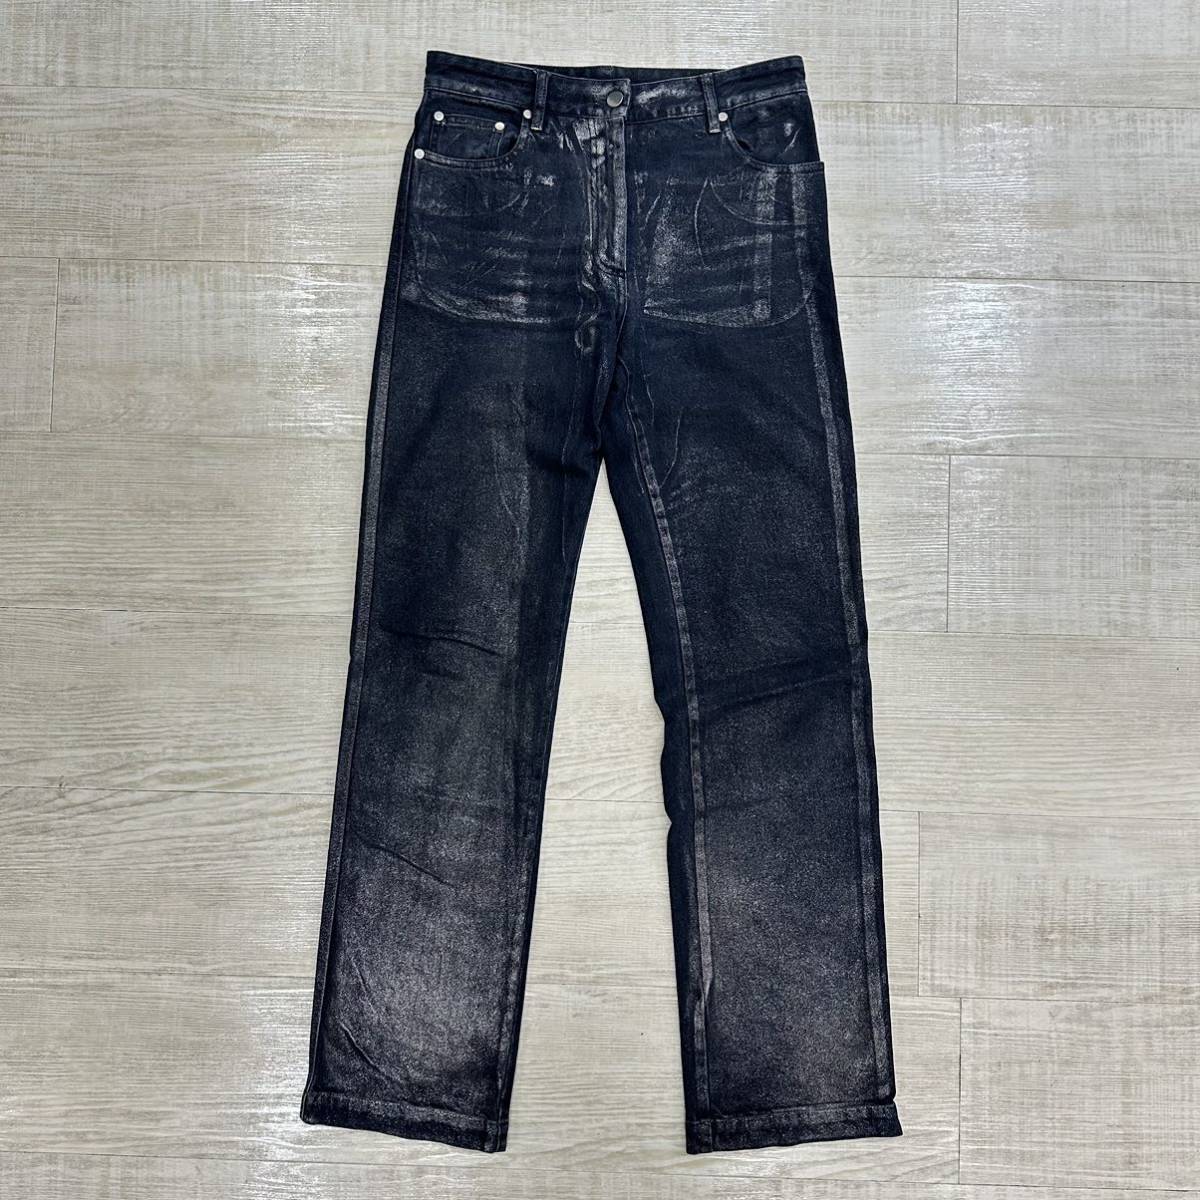 21aw 2021 PETER DO ピータードゥ FROSTED MAGGIE JEANS プリント 加工 デニム パンツ PD-FW21-143B-DE MADE IN ITALY インディゴ 系 38